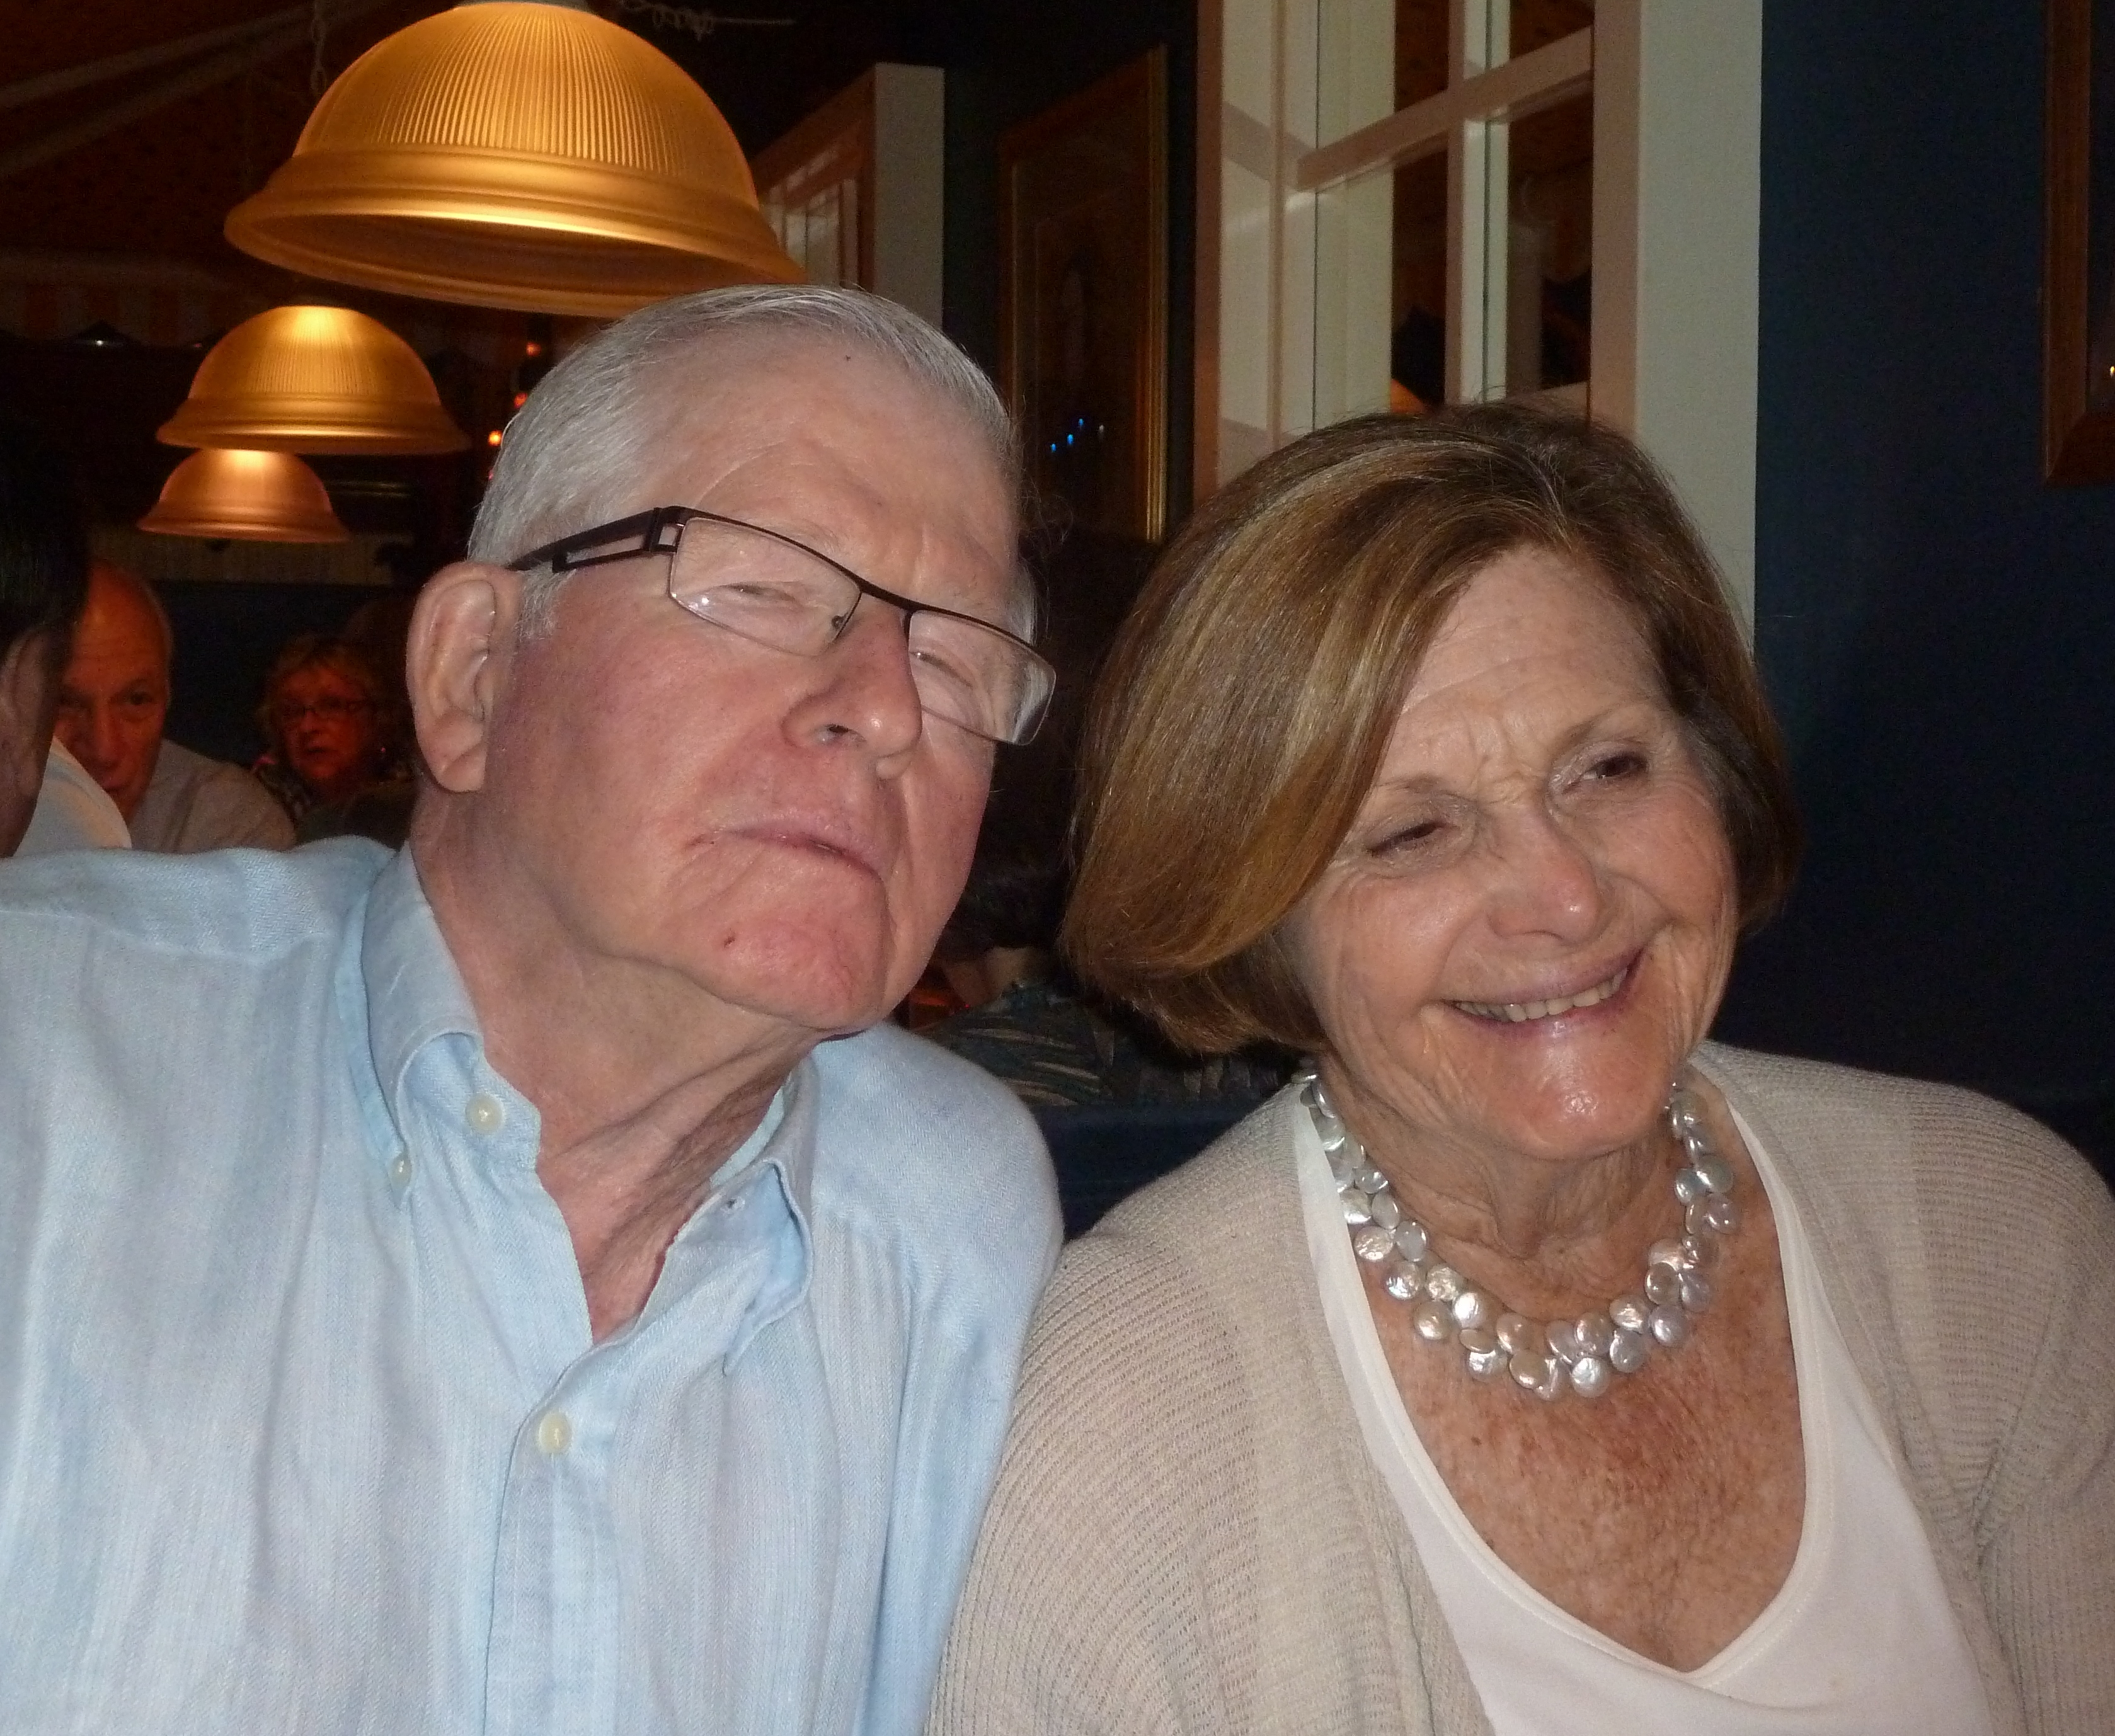 On Saturday November 3, 2012 we had dinner in Naples, FL with Steve and Sandy Earl. - 004